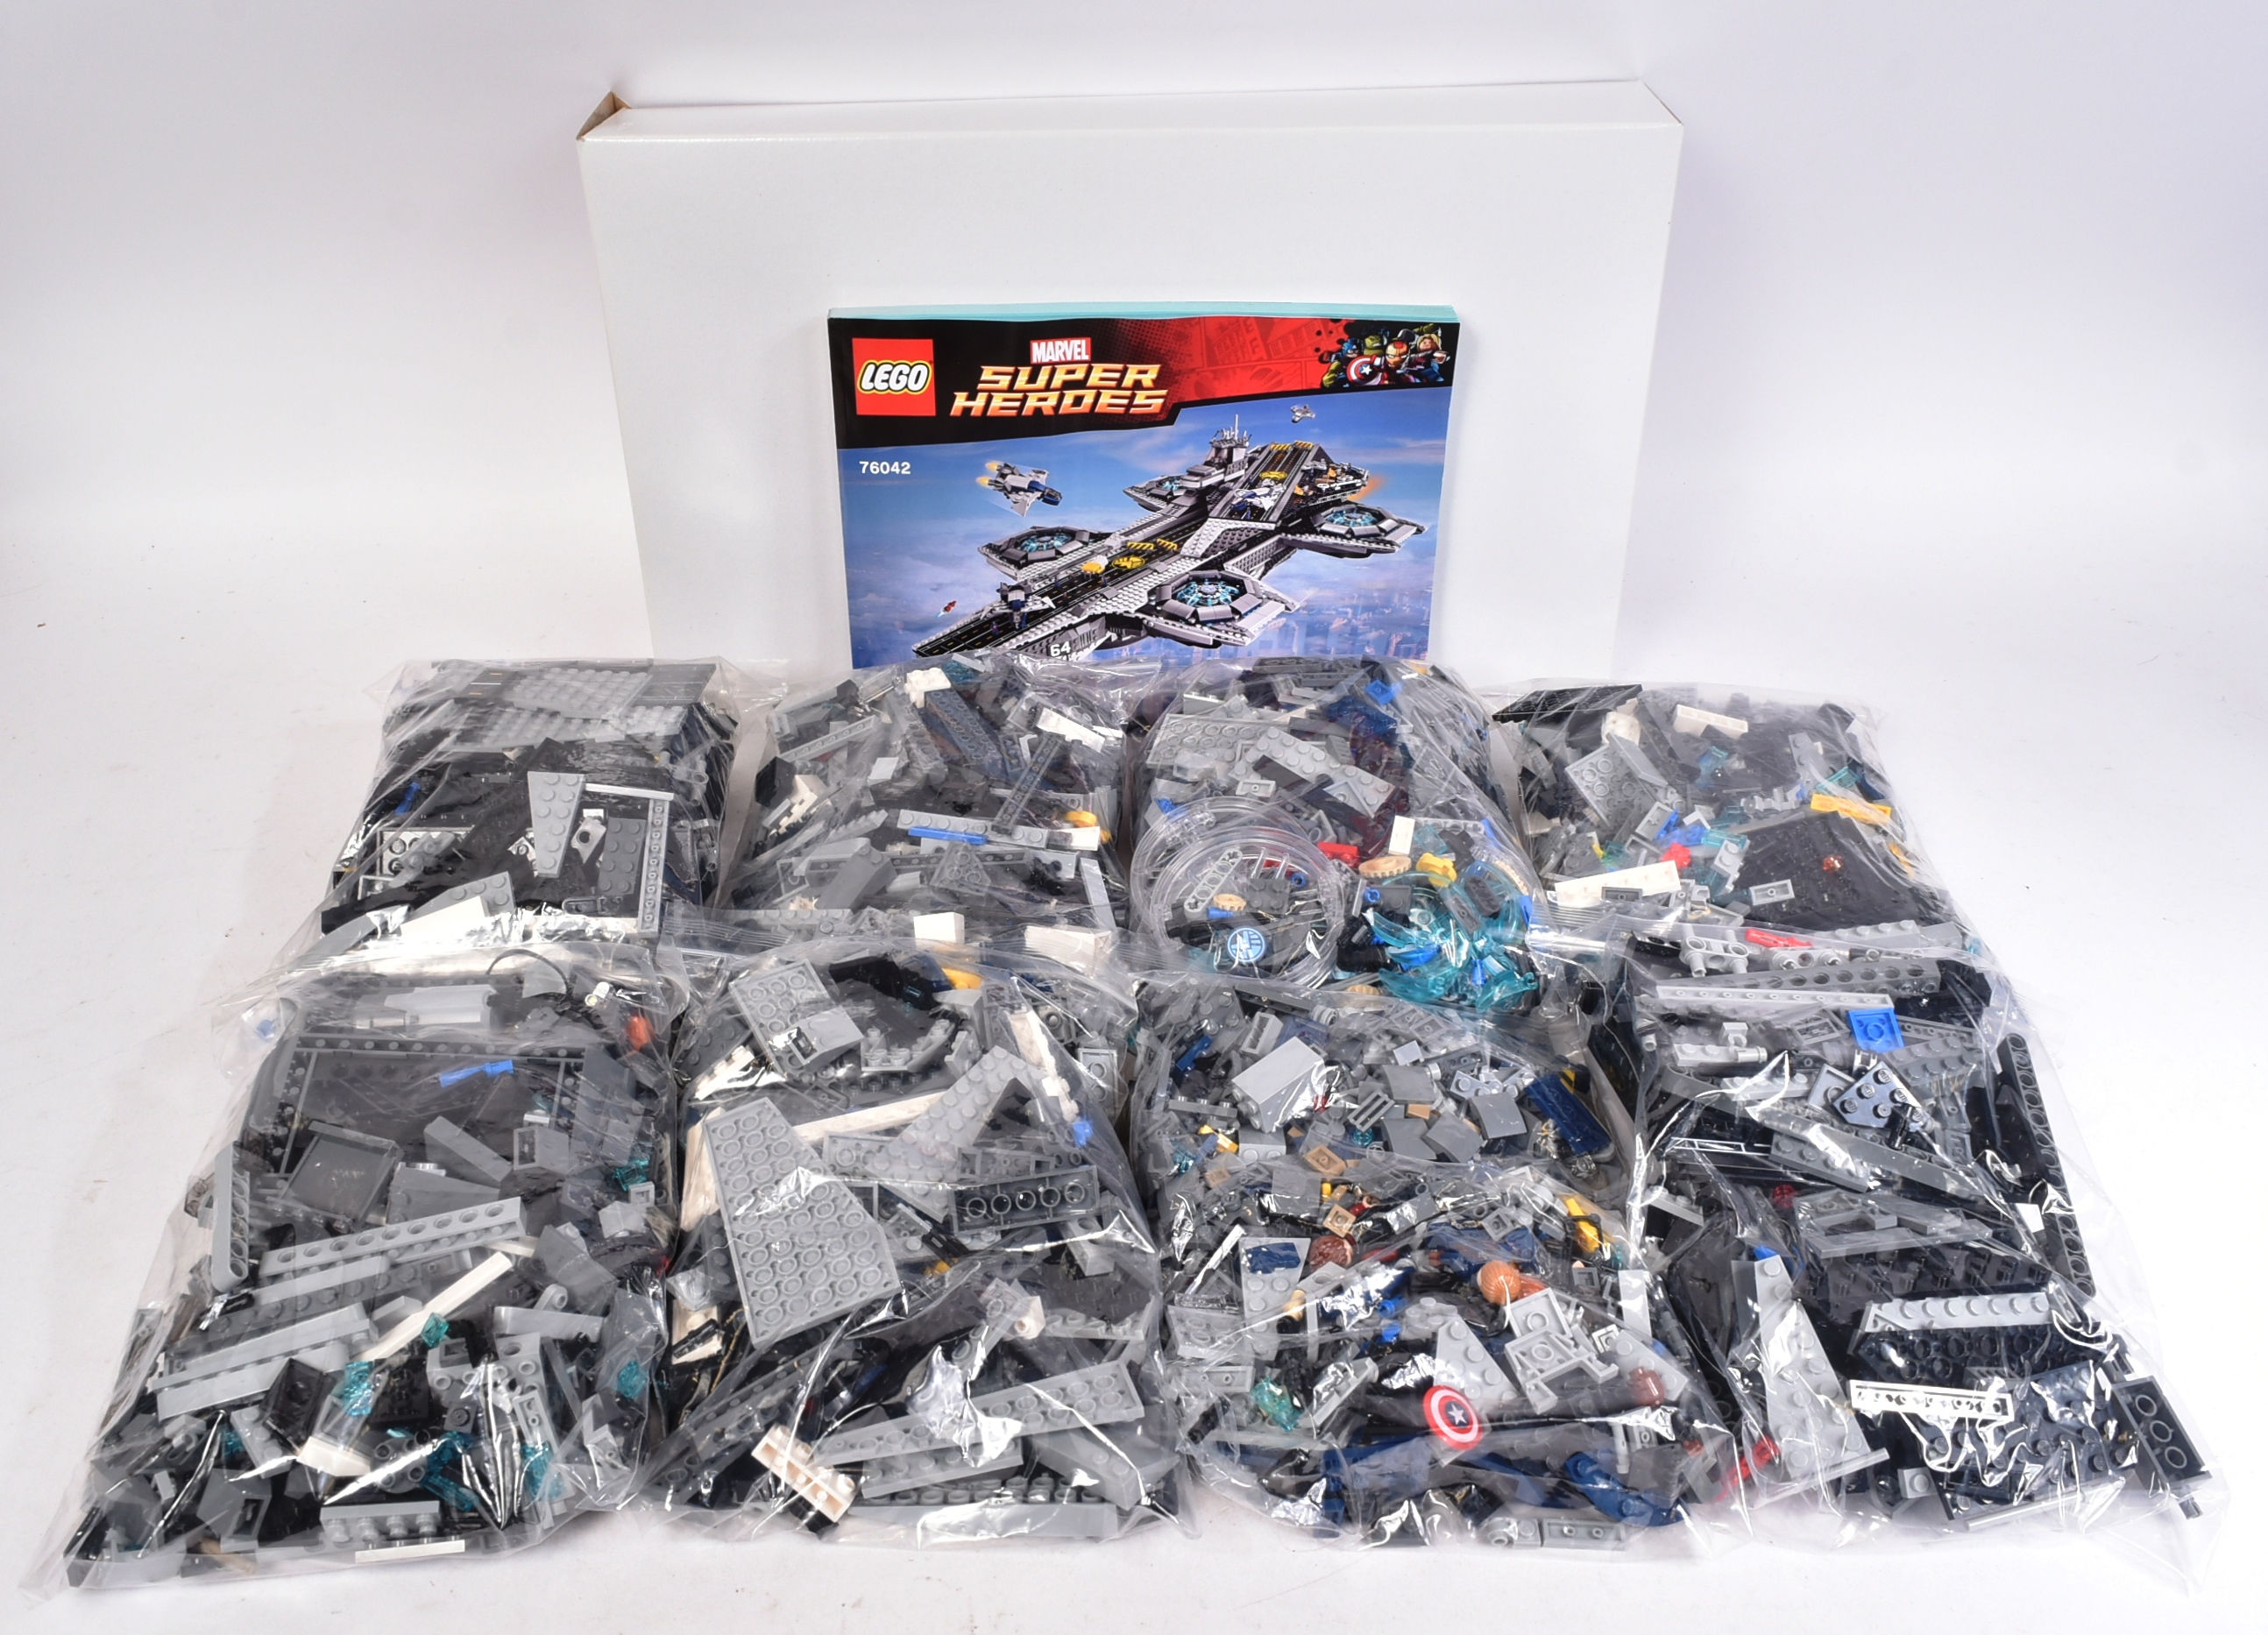 LEGO - MARVEL - SUPER HEROES - 76042 - THE SHIELD HELICARRIER - Image 4 of 5